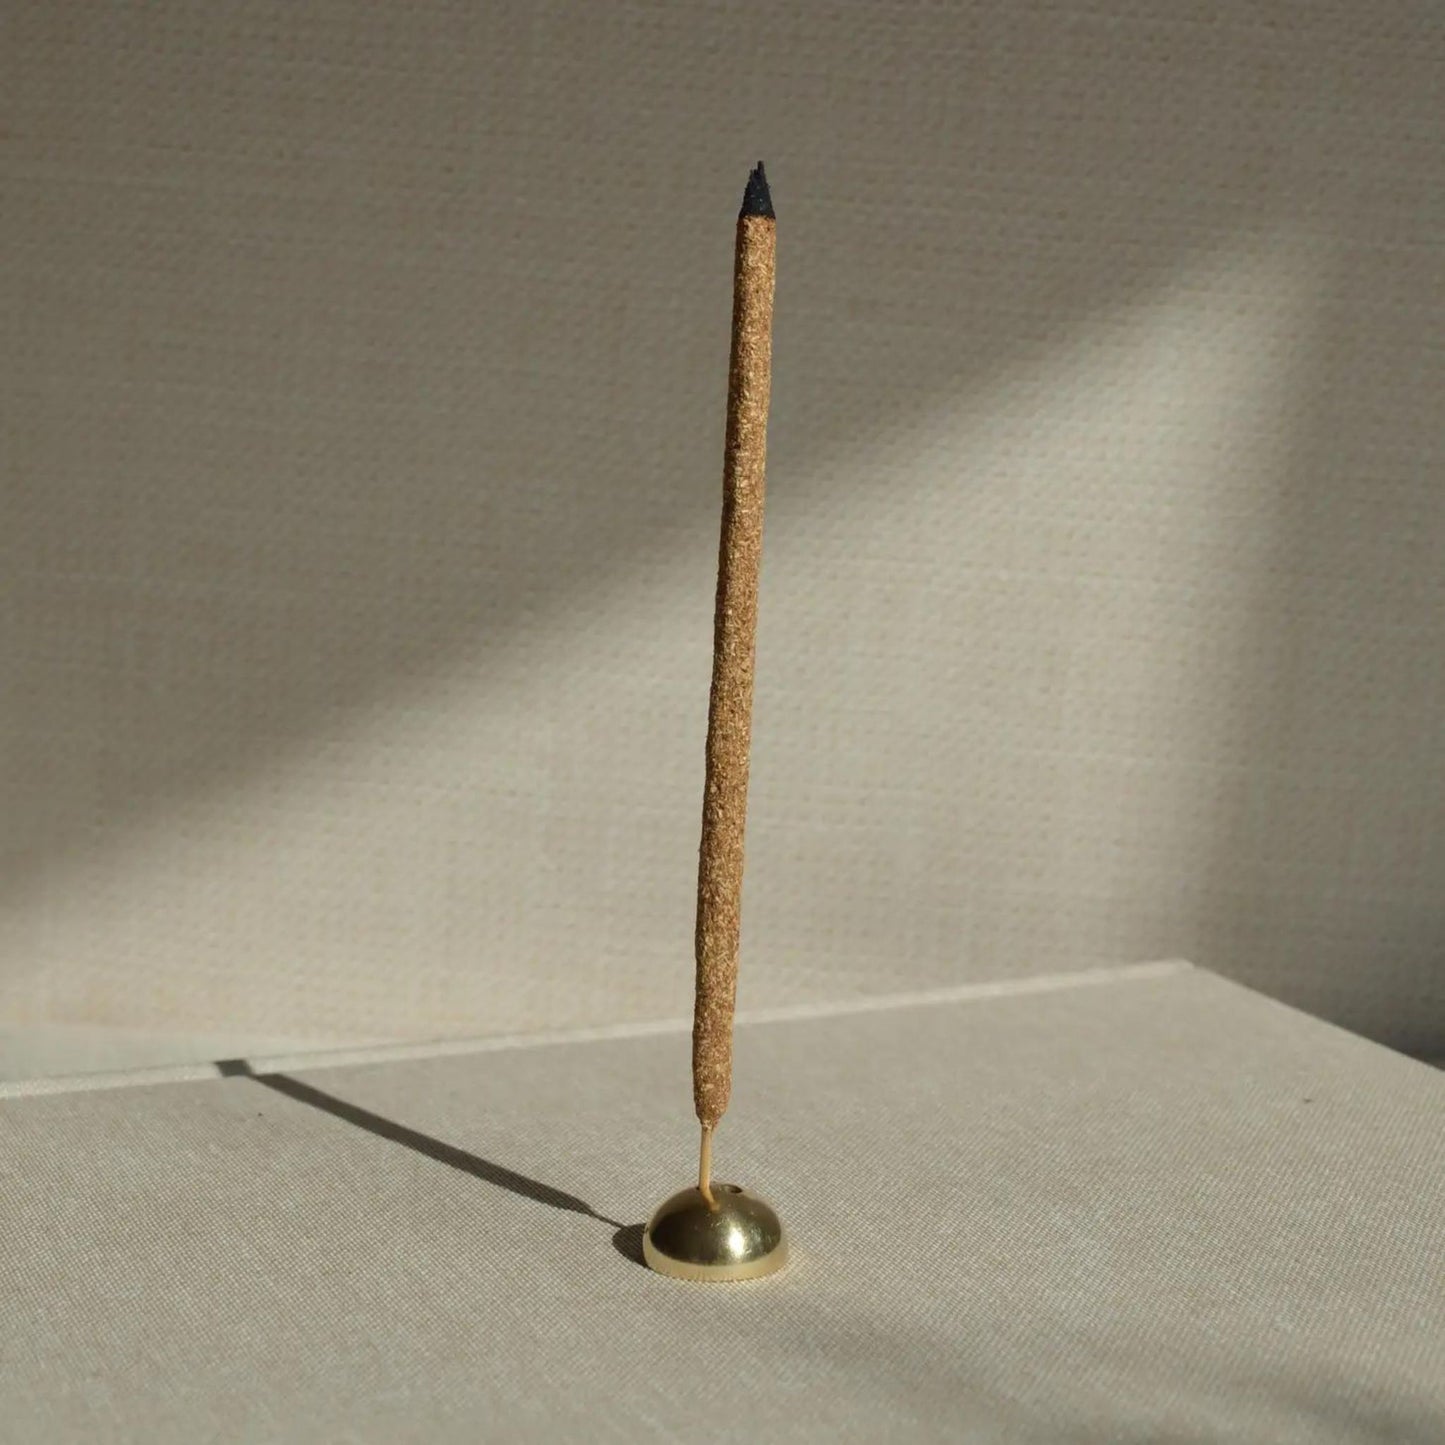 Brass Arch Incense Holder in a minimalist golden dome shape with a burning Incense Stick in it.